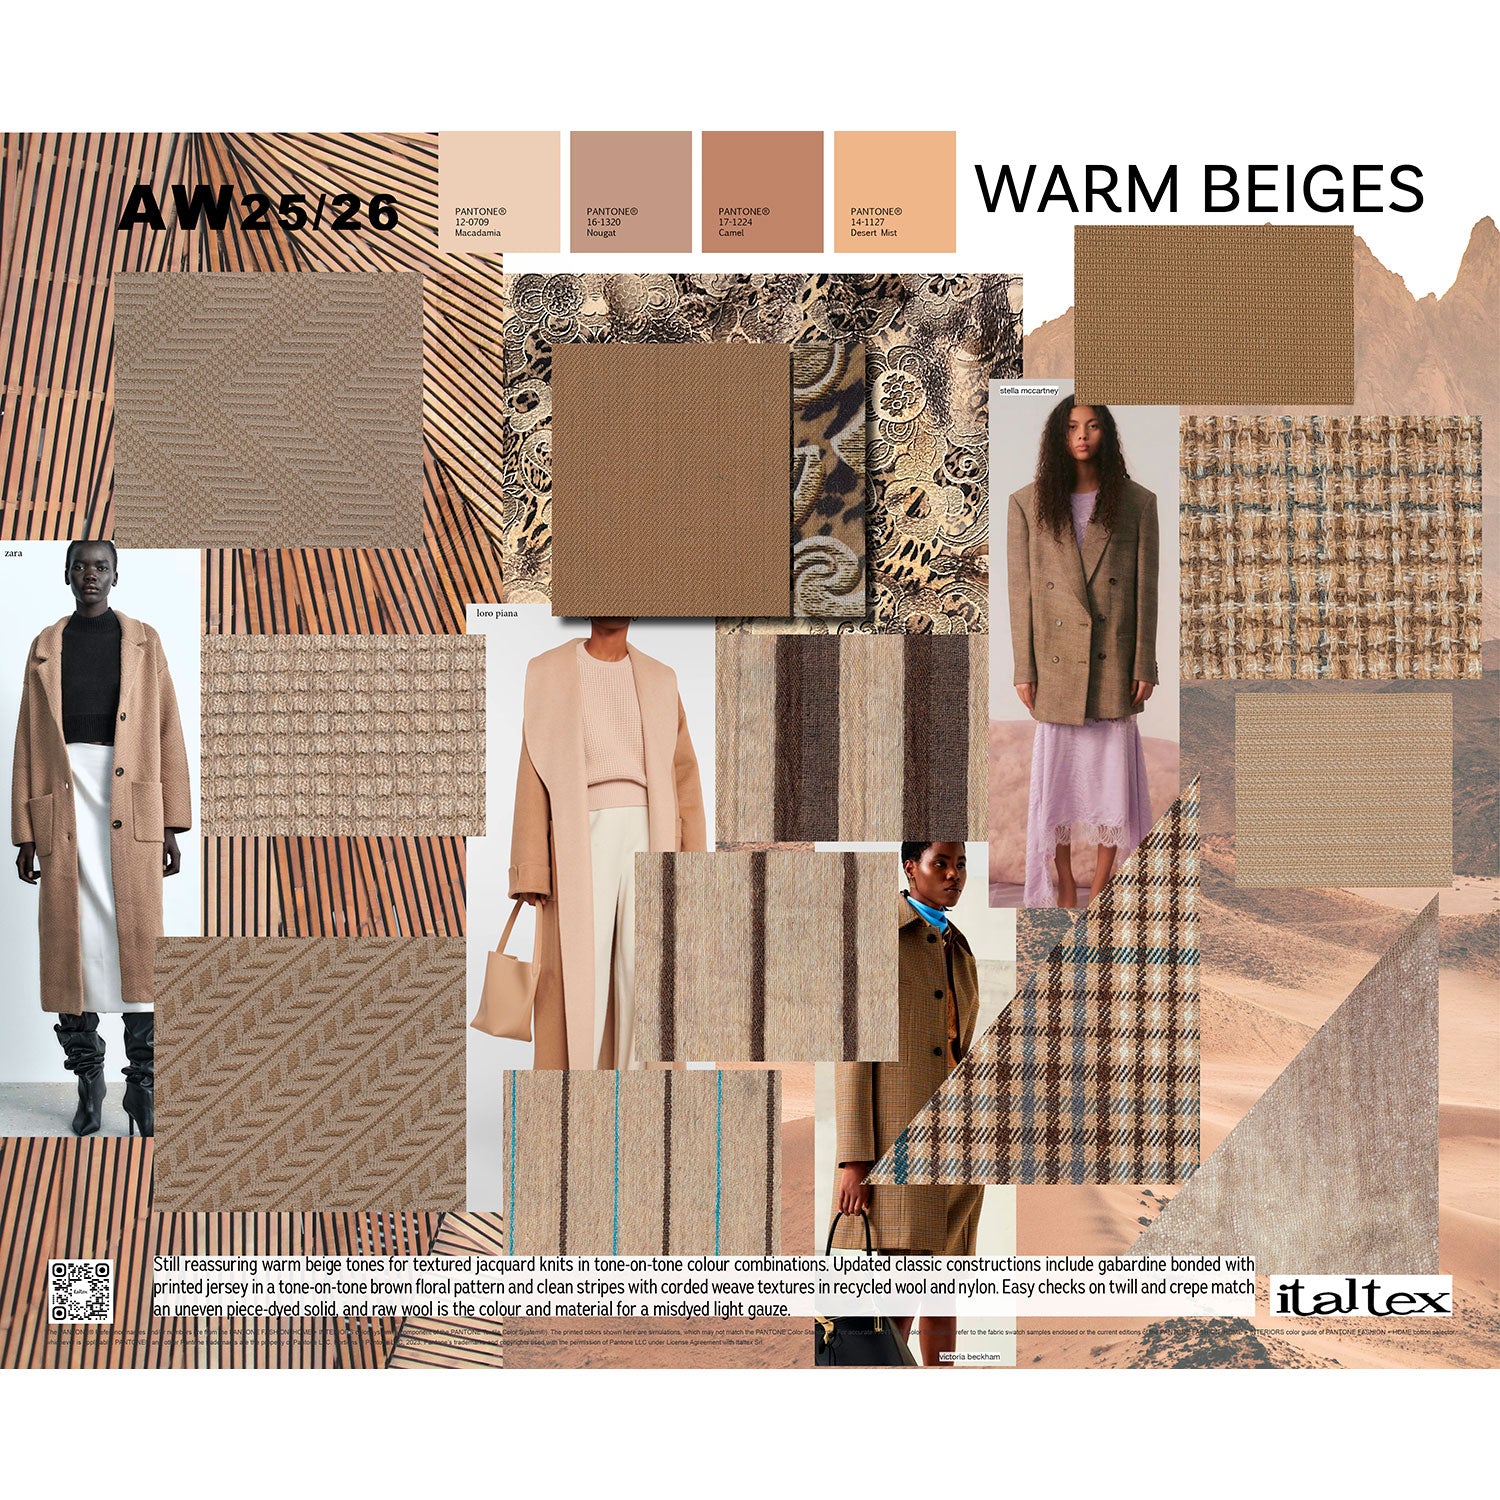 Four warm beige colour shades and eleven fabric swatches for women's wear autumn winter 25/26. Three are textured jacquard knits in tone-on-tone colour combinations. One is a gabardine bonded with printed jersey in a tone-on-tone brown floral pattern. Two are clean stripes with corded weave textures in recycled wool and nylon. Two checks: one on twil, one on crepe. One textured piece-dyed solid. One mis-dyed light gauze